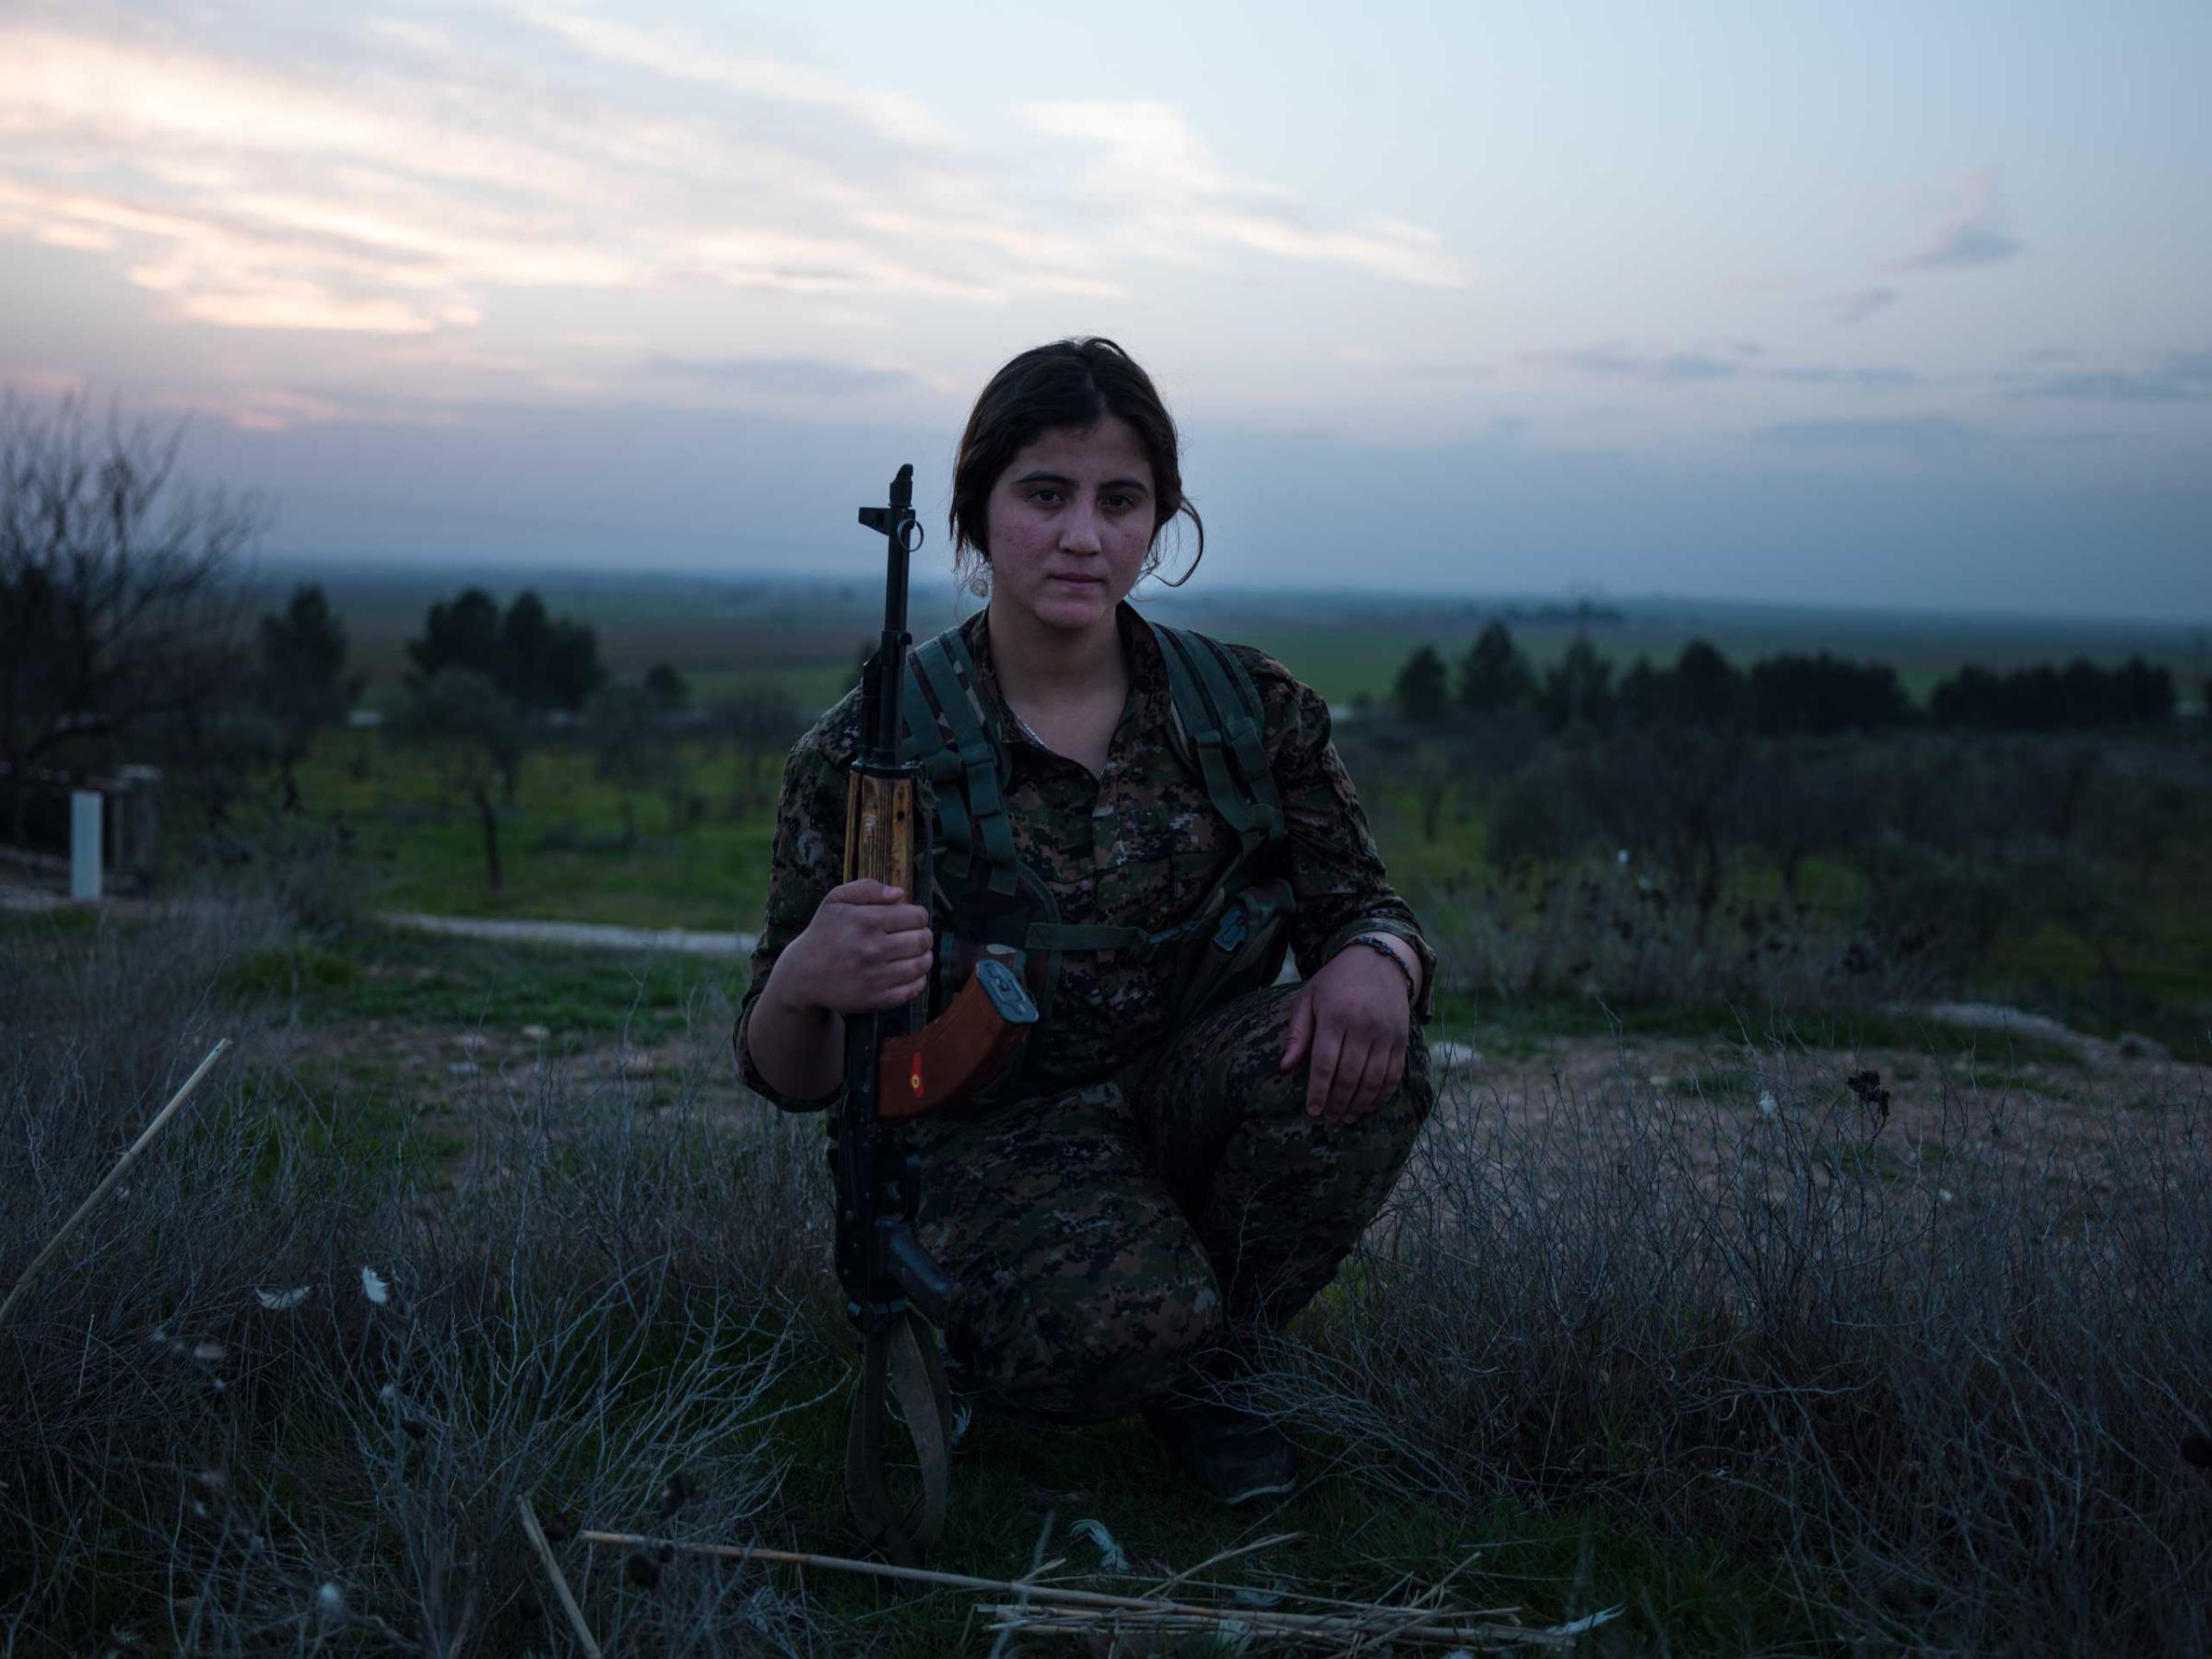 20-year old YPJ fighter Aijan Denis from Amuda, Syria: "Where I am now, men and women are equal and we all have the same thought, which is fighting for our ideology and the rights of women. My three sisters and I are all in YPJ. "Newsha Tavakolian for TIME I joined YPJ in 2011. One day when I was watching TV, they were showing pictures of women who had been killed. I was really impressed by that and decided to join the army myself. Where I am now, men and women are equal and we all have the same thought, which is fighting for our ideology and the rights of women. My three sisters and I are all in YPJ. They all operate RPGs. I wish to become so skilled that I will be allowed to do the same."